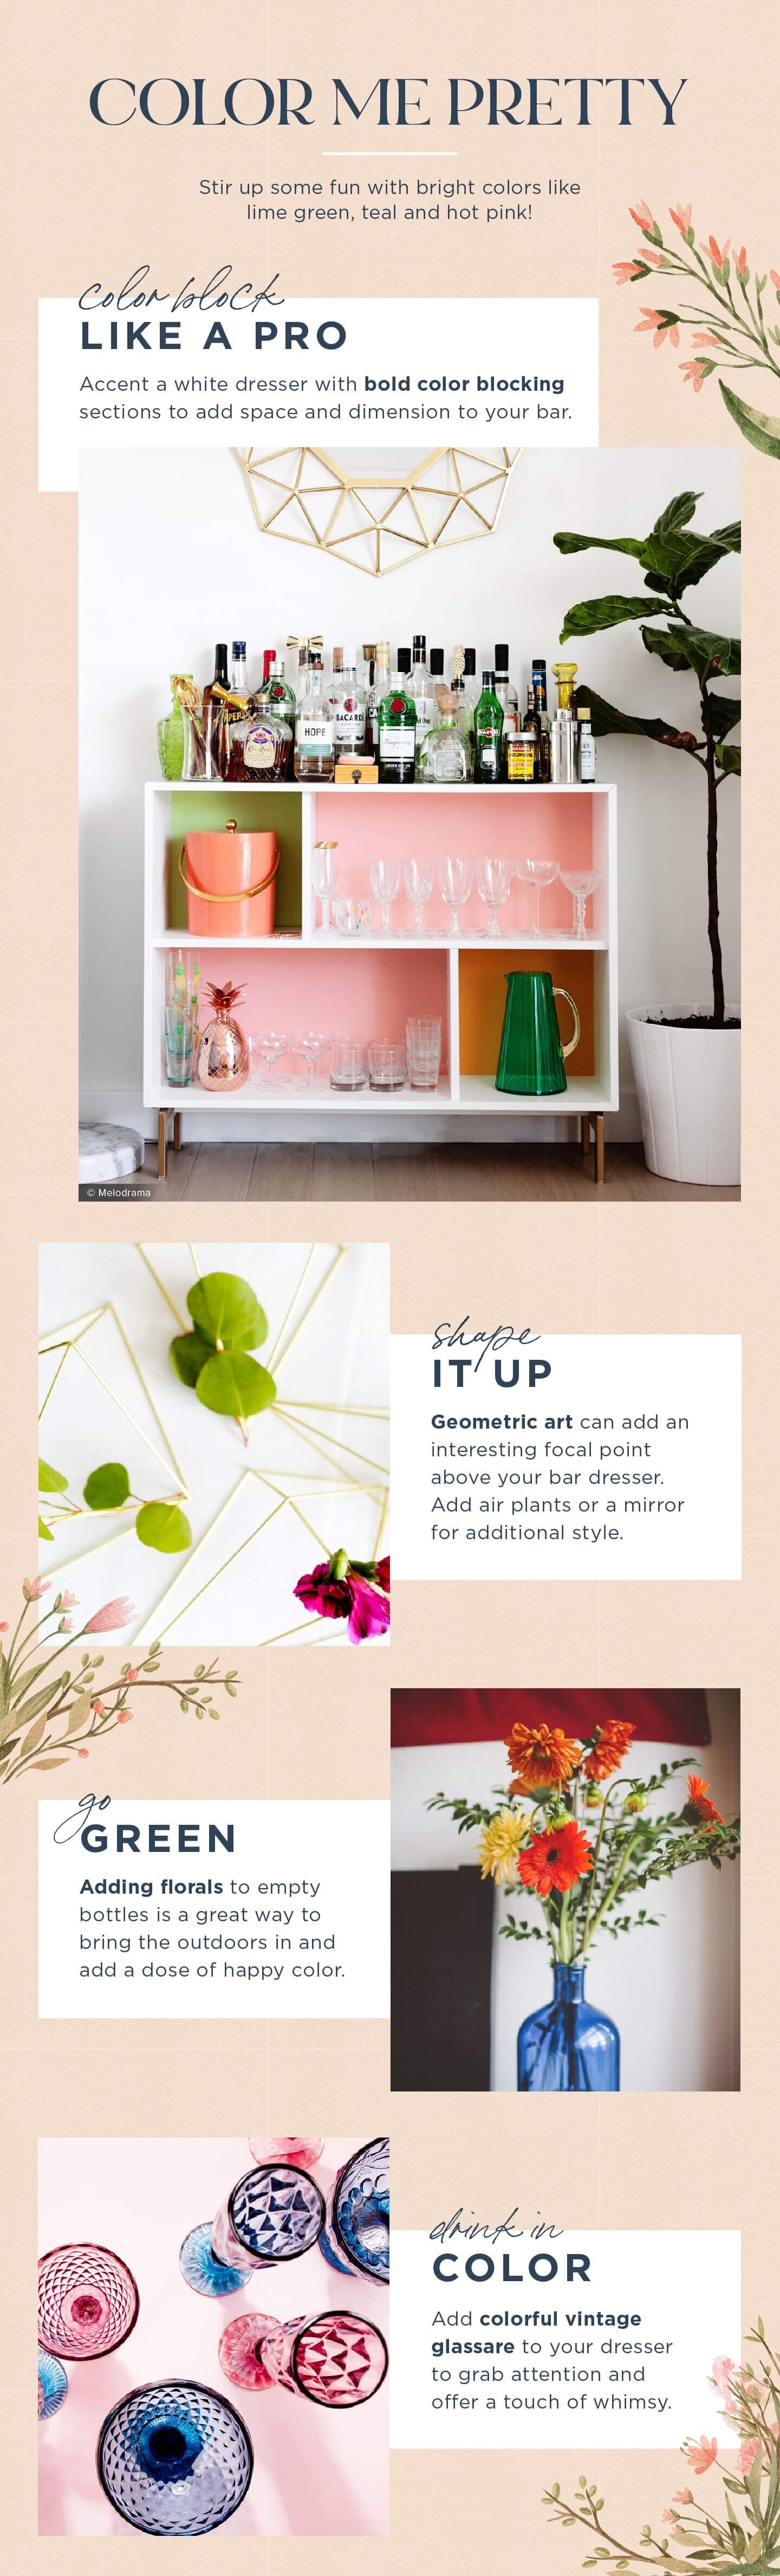 dresser-bar-cart-styling-5-color-me-pretty.png